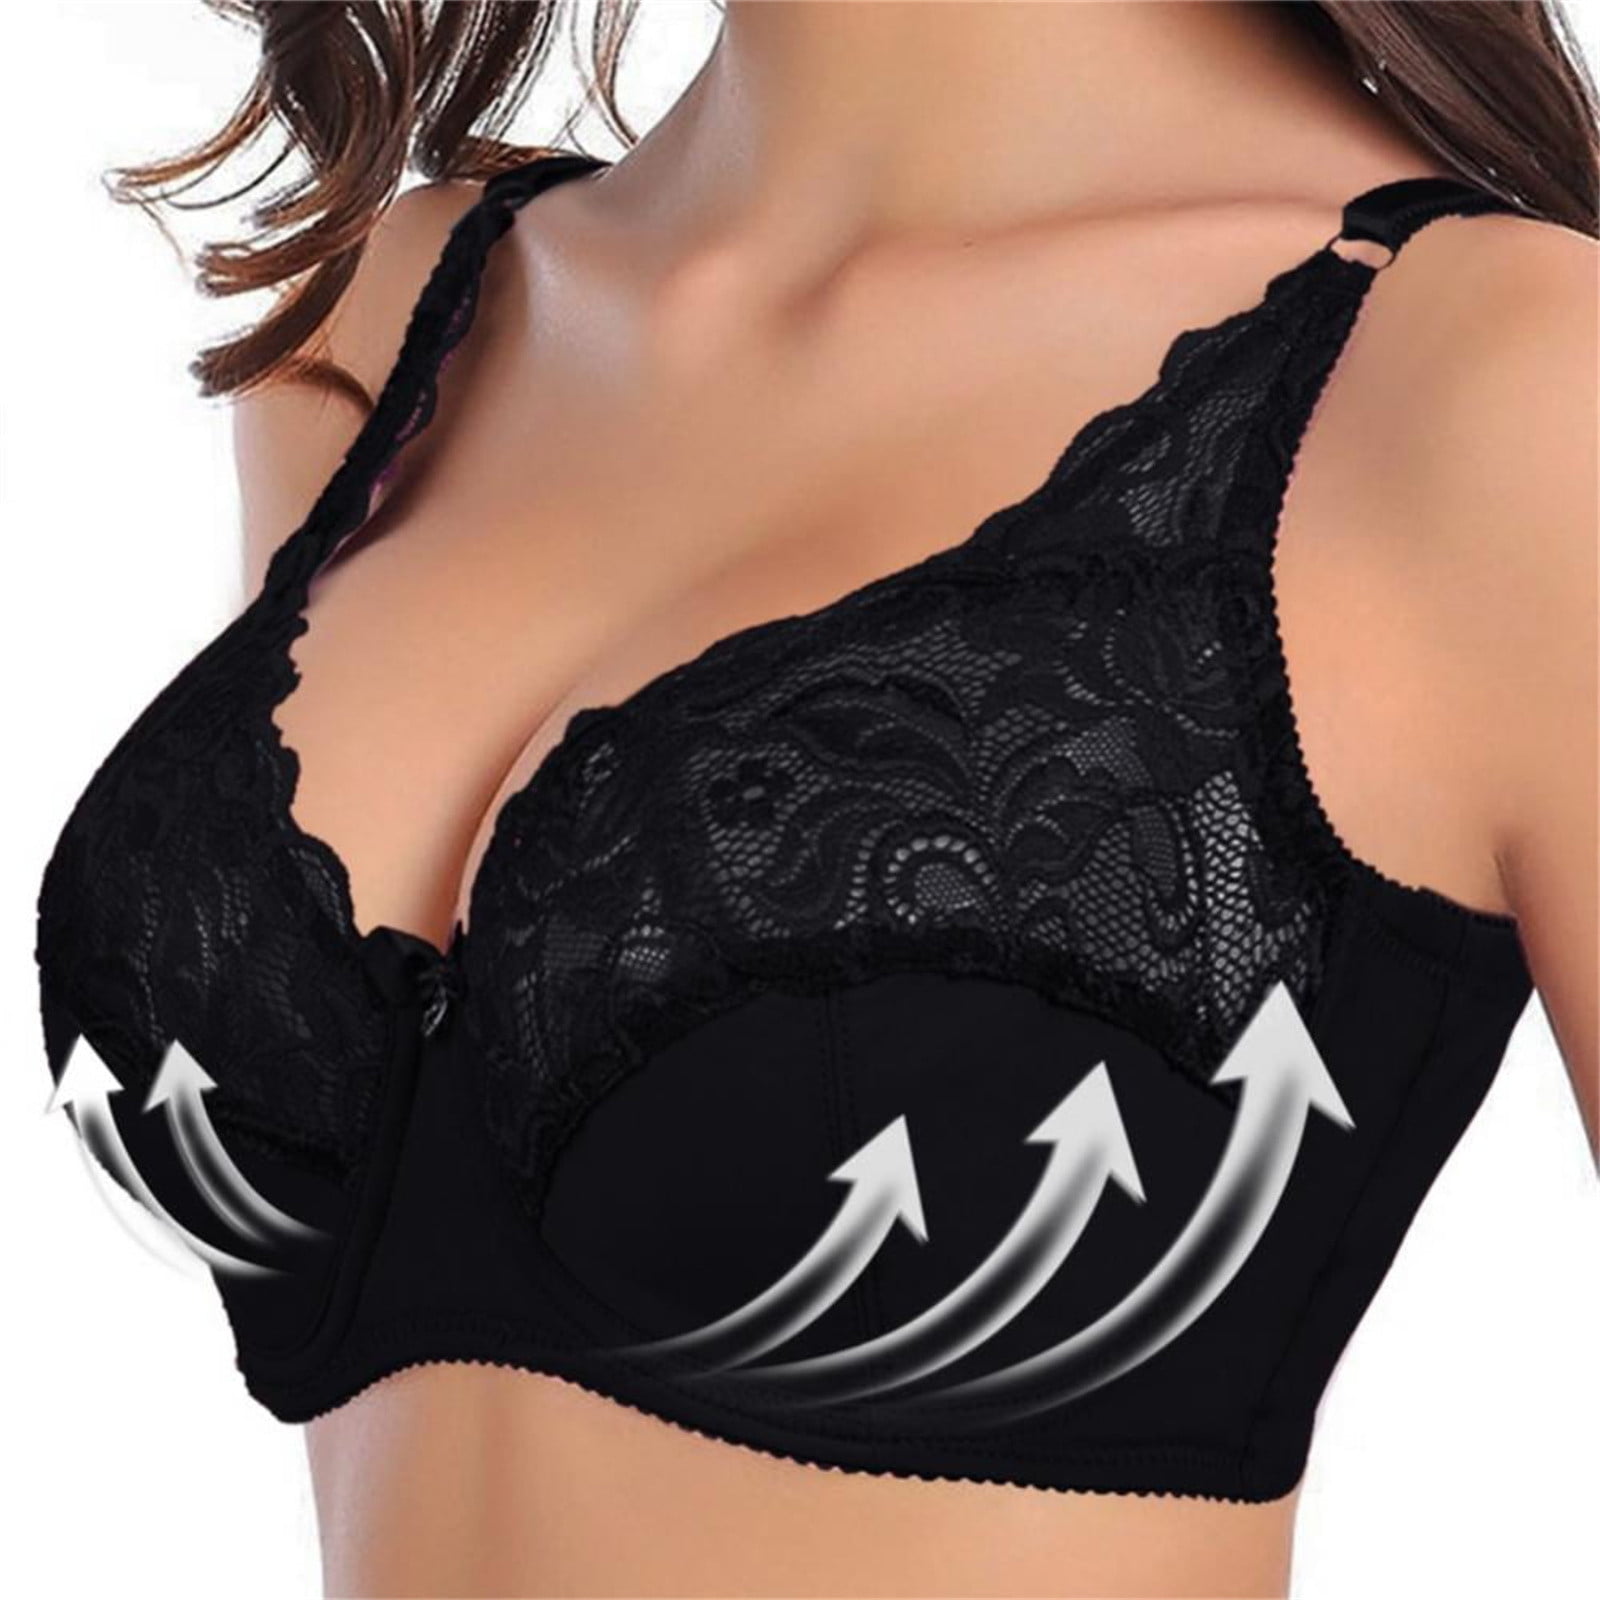 EHTMSAK Push Up Bras 38dd Slim Camisoles for Teens Floral Adjustable Straps  Sports Bras for Women Large Bust Support Padded Push Up Lace Minimizer